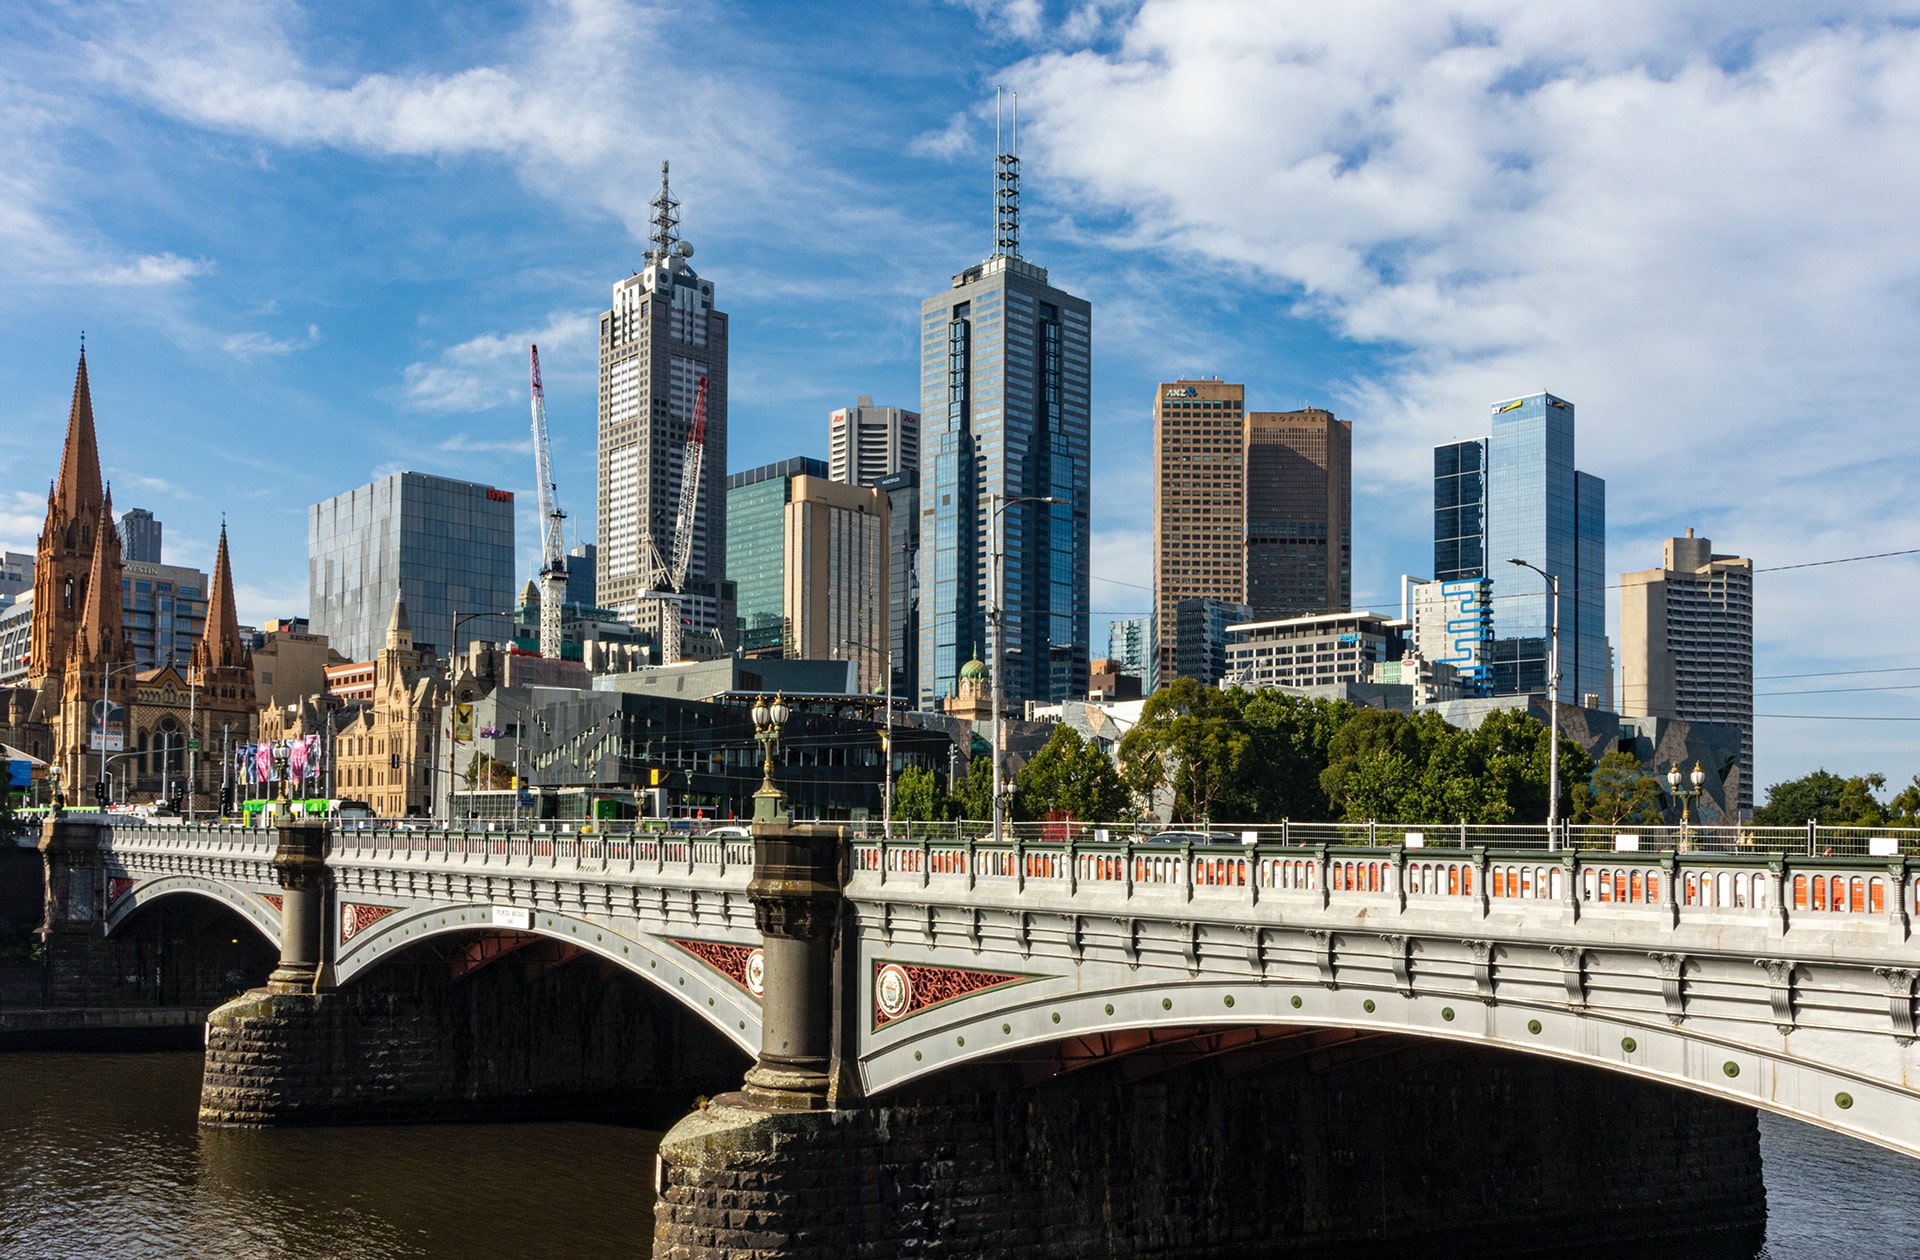 Melbourne city skyline during the day